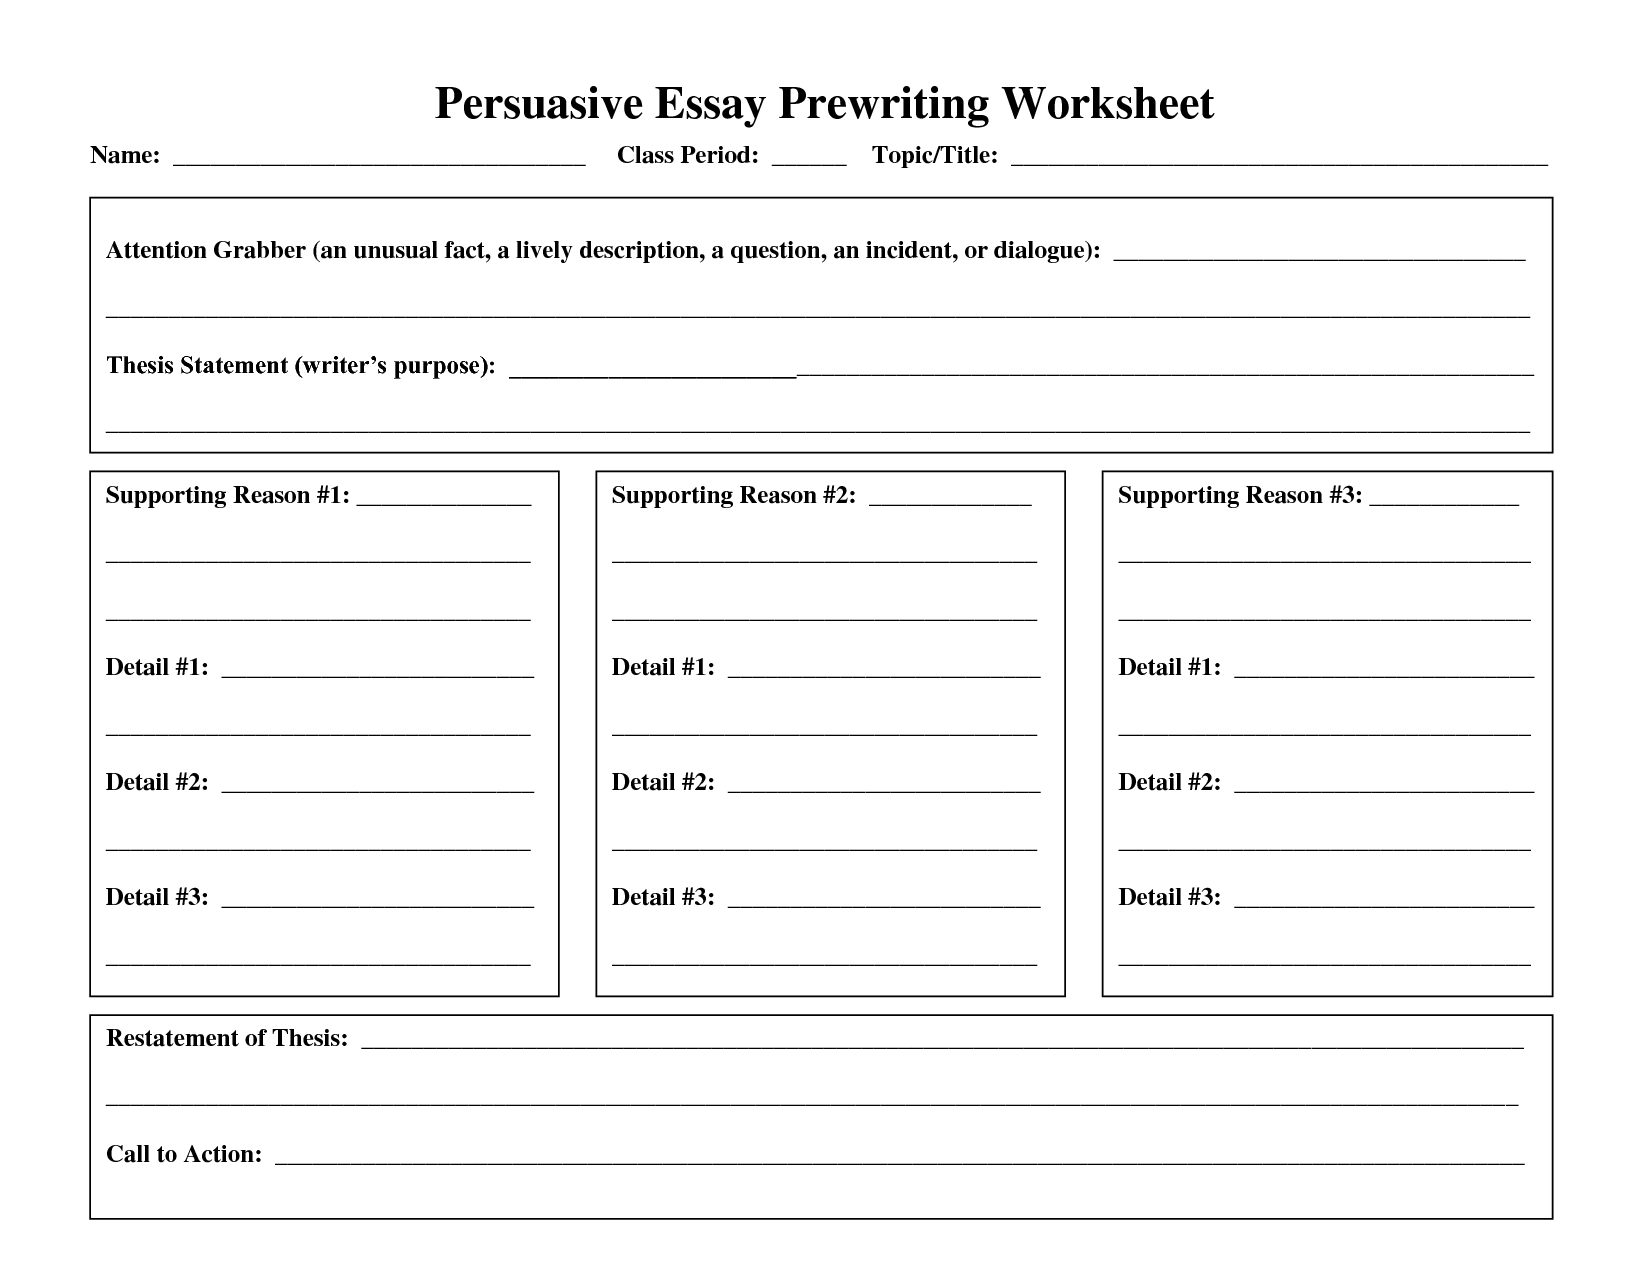 Writing Worksheets For Middle School Students 1395286